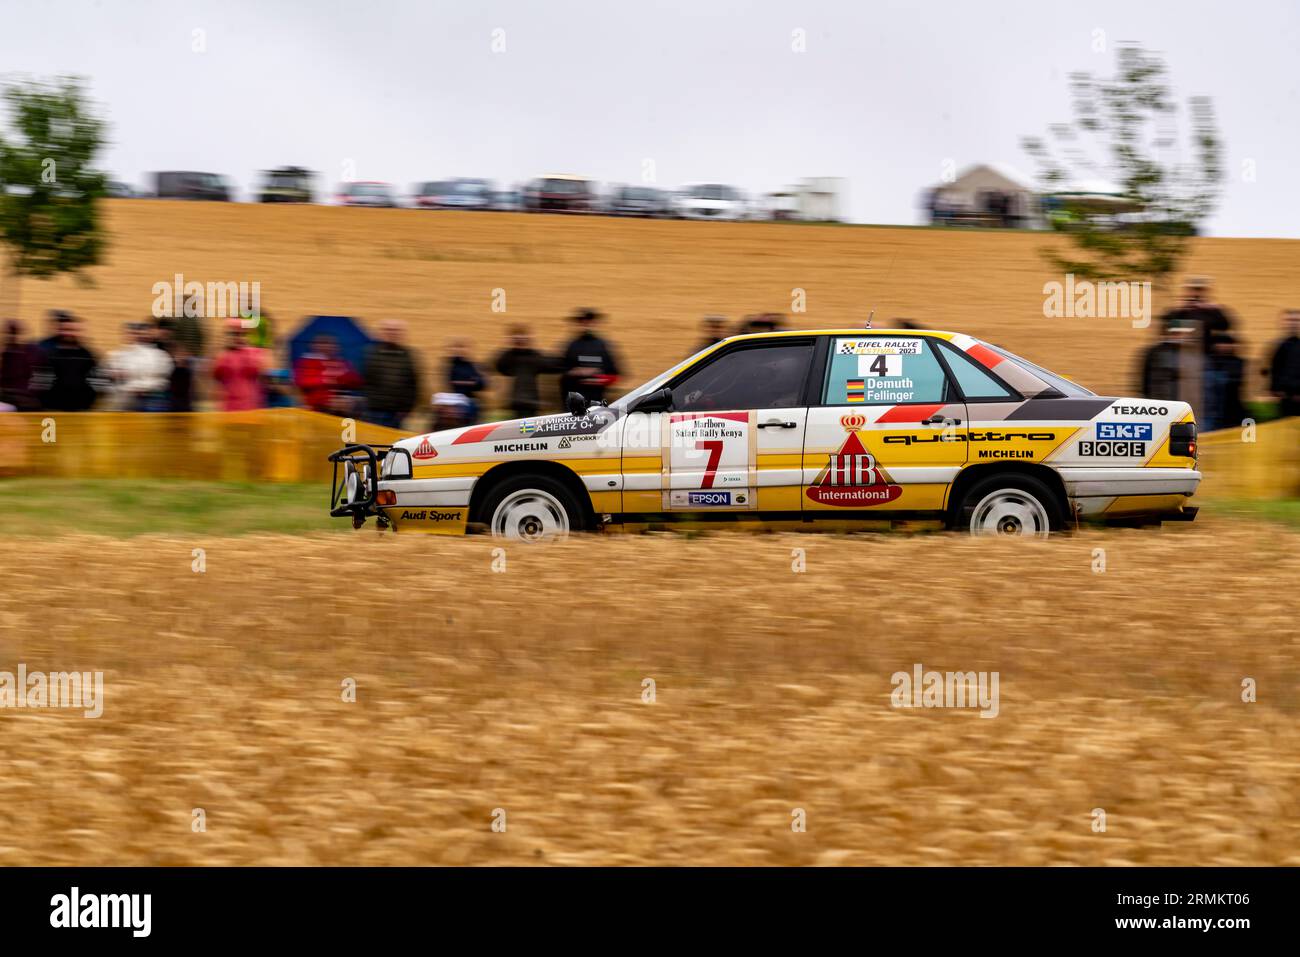 Audi sport quattro s1 e2 hi-res stock photography and images - Alamy